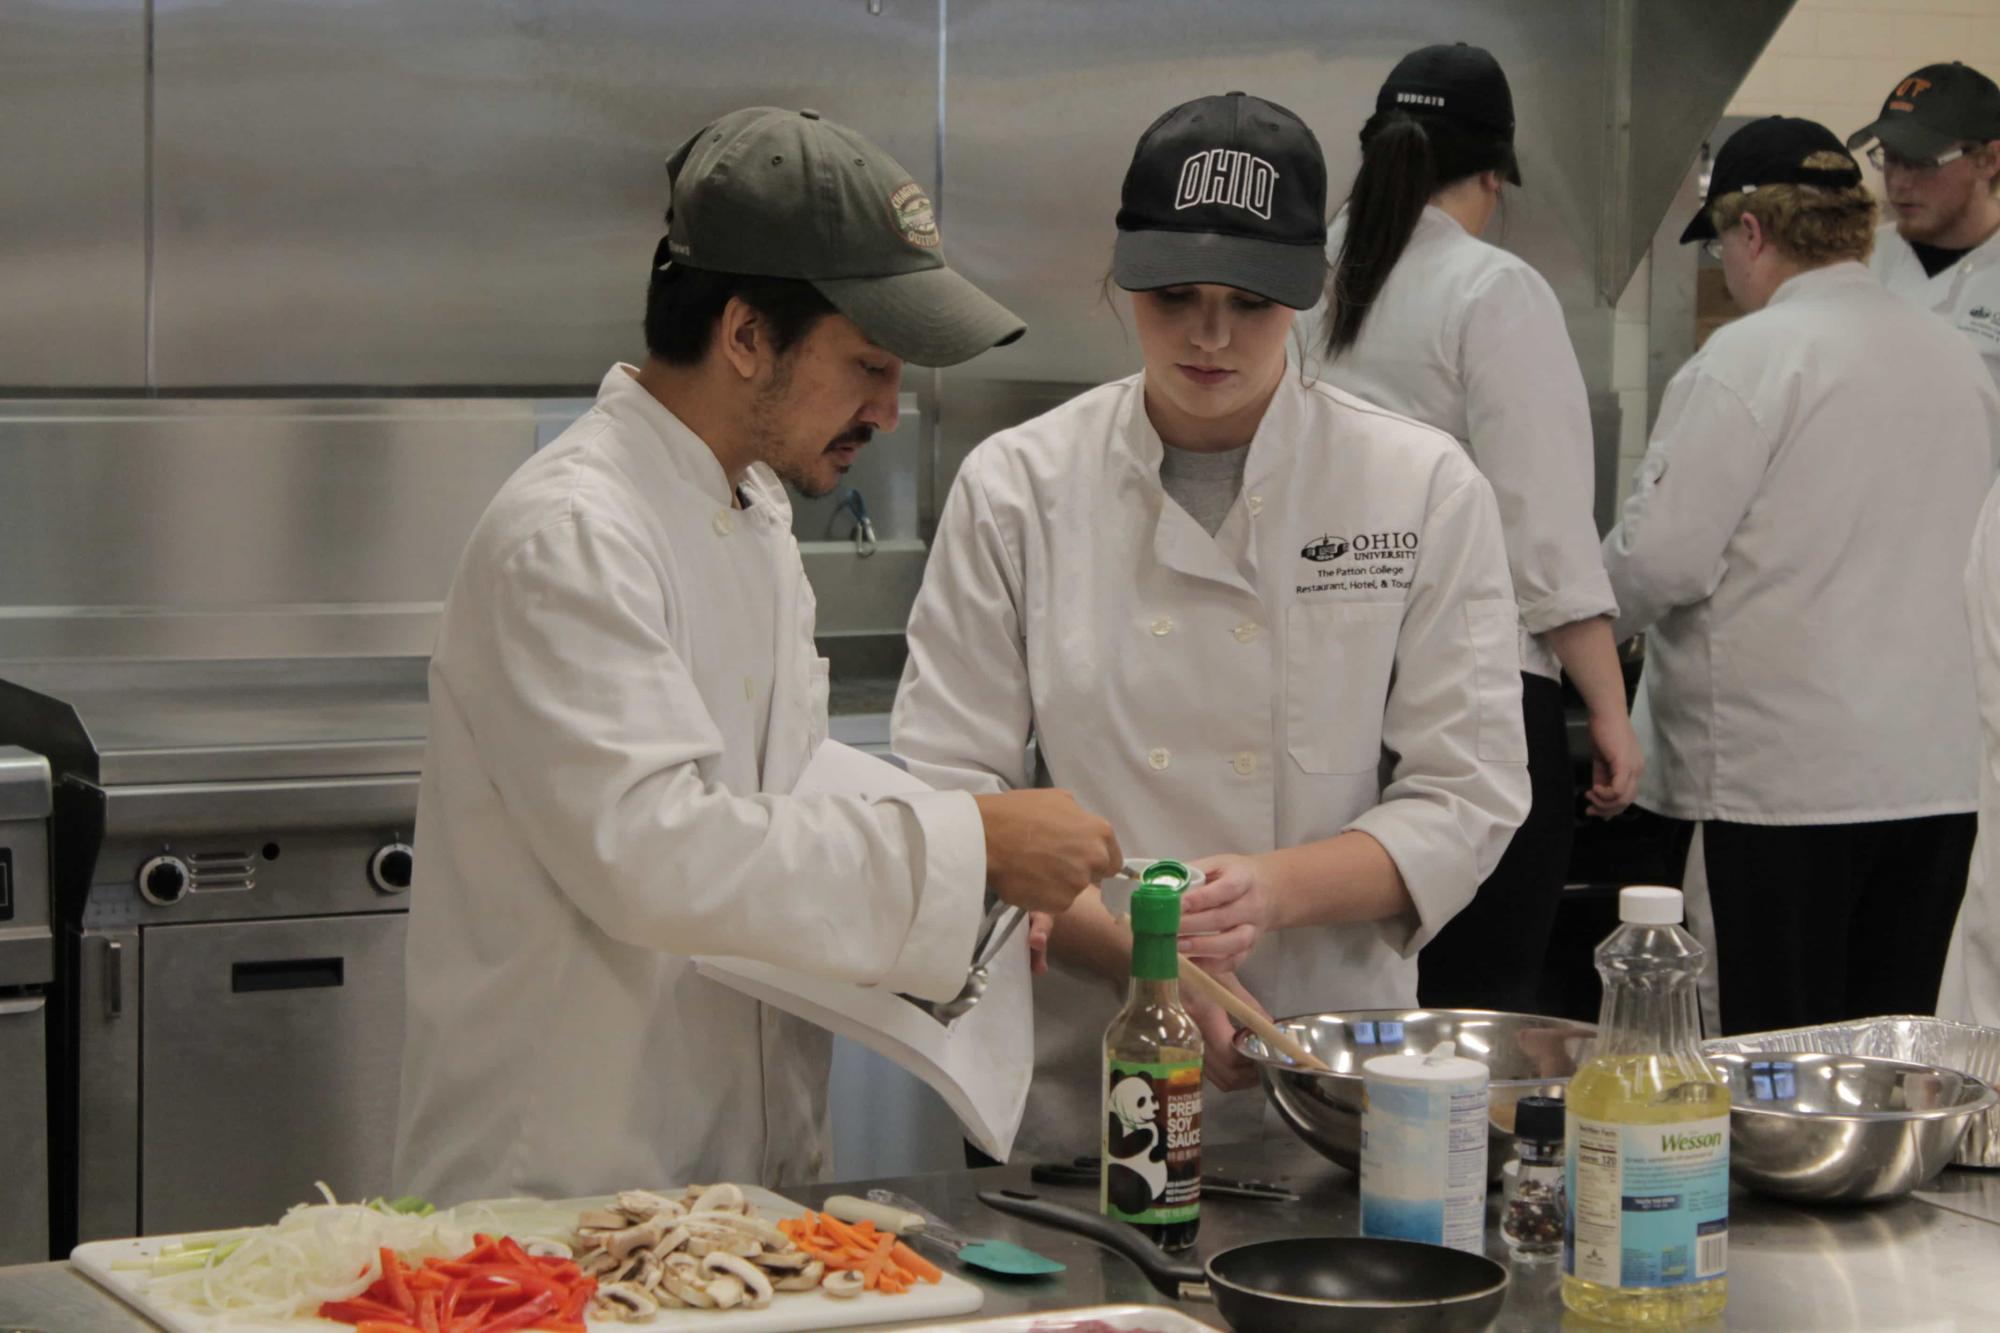 Culinary students work together while cooking.